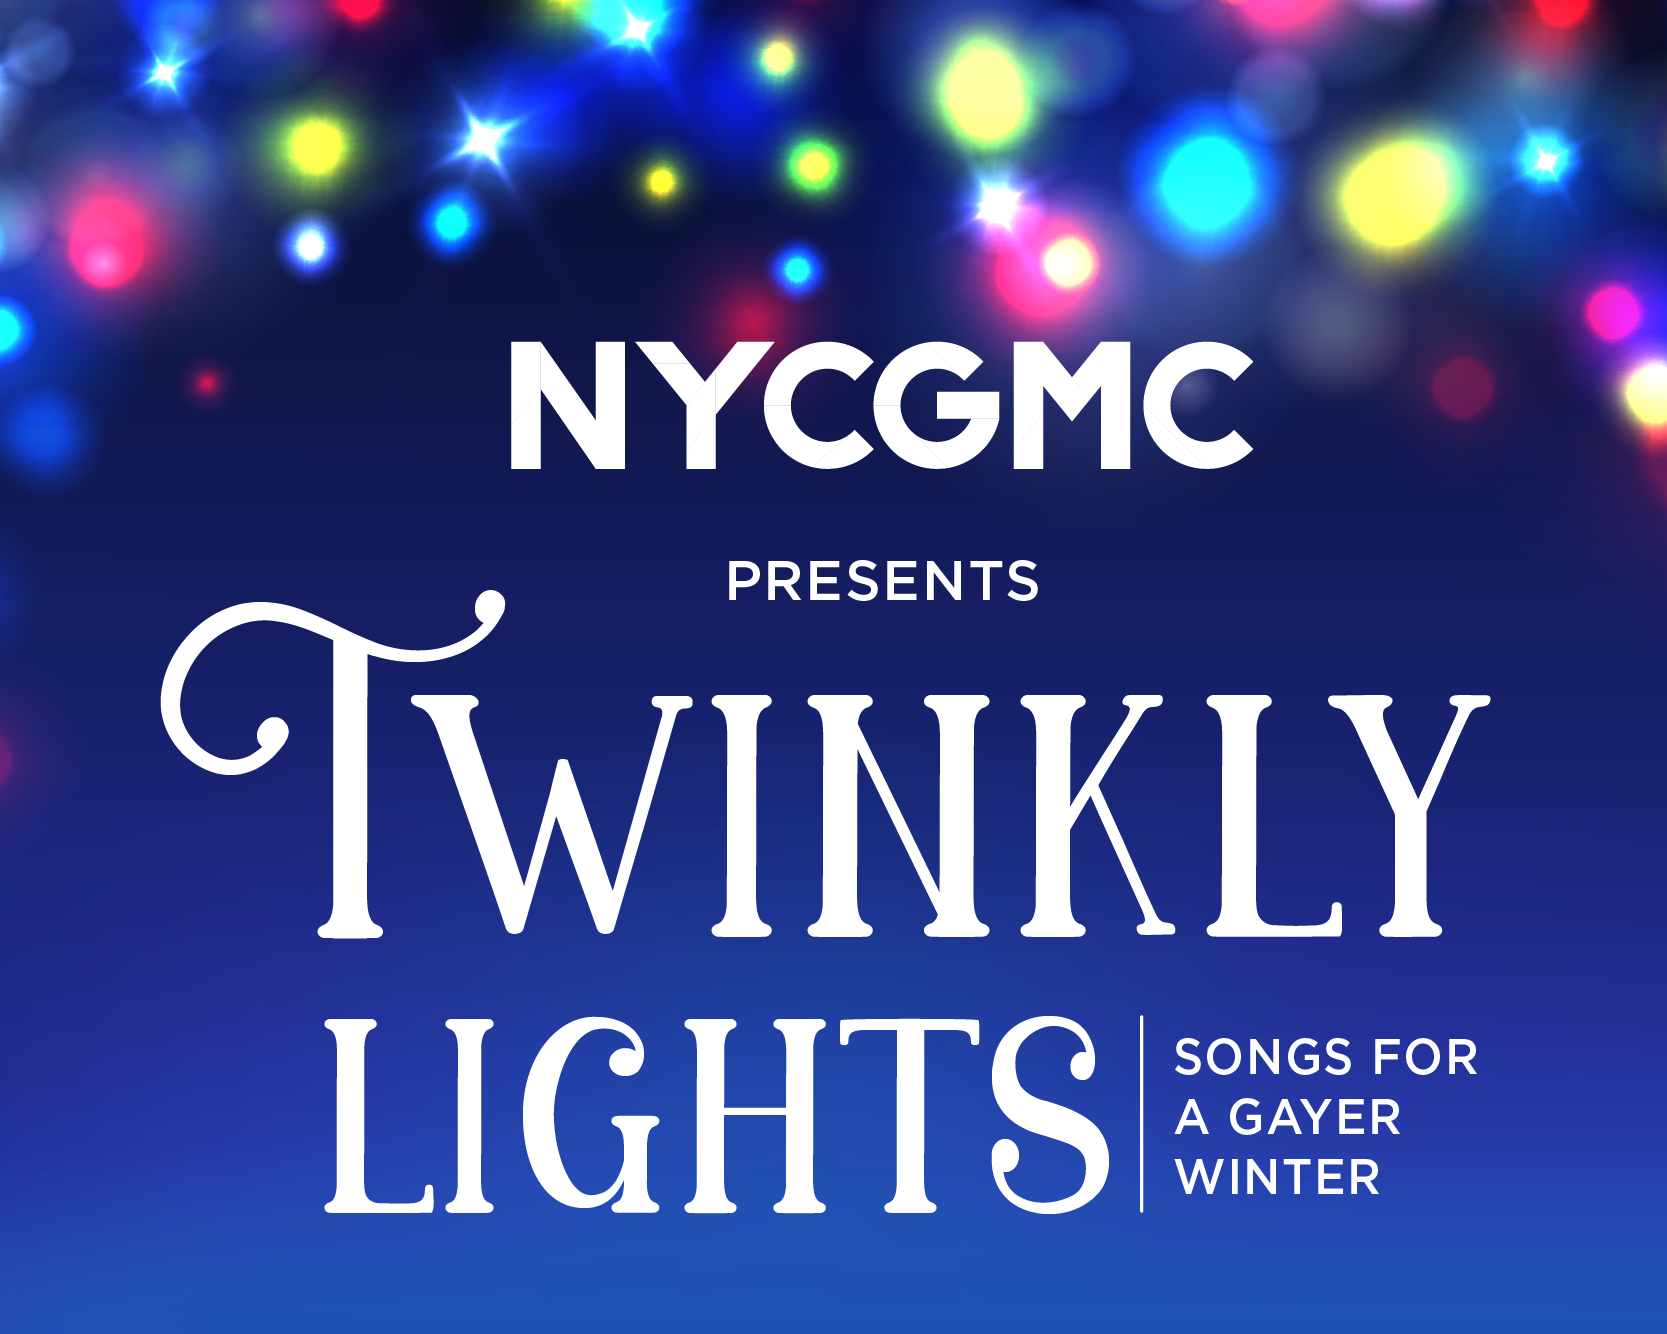 NYCGMC presents Twinkly Lights: Songs for a Gayer Winter